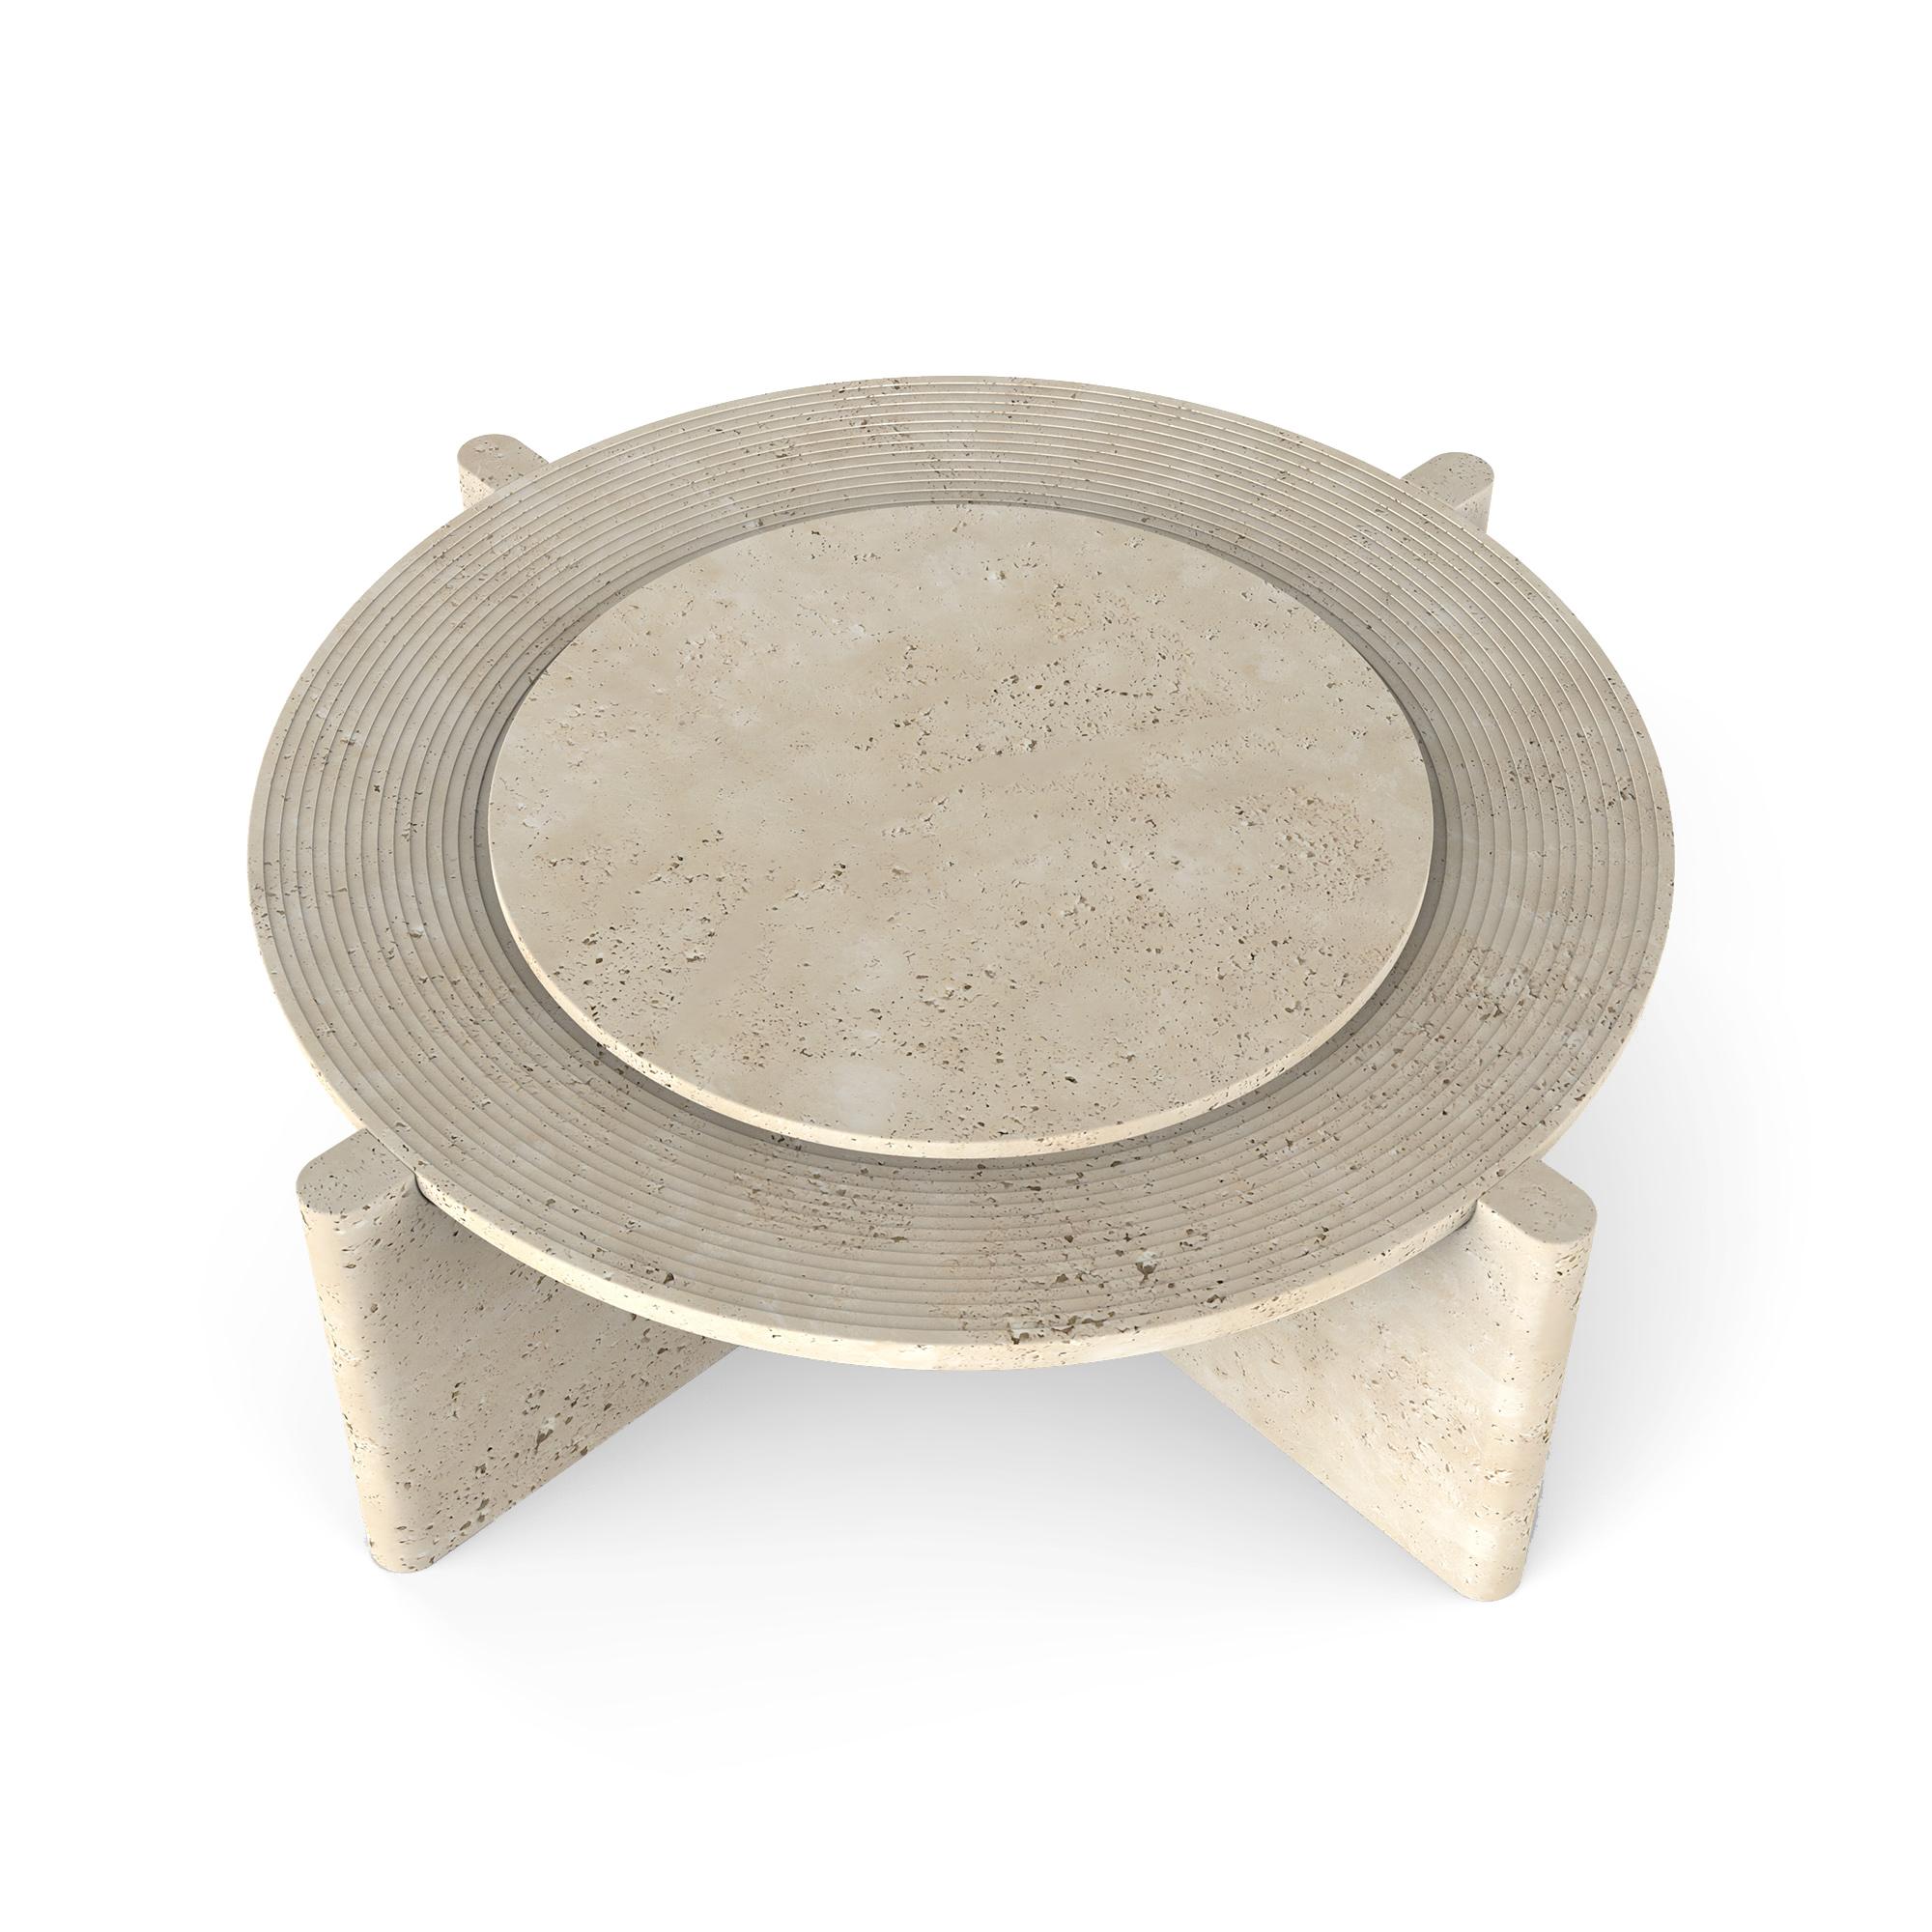 Carved Arkhe No 2 Coffee Table Travertine, Modern Sculptural Round by Fulden Topaloglu For Sale